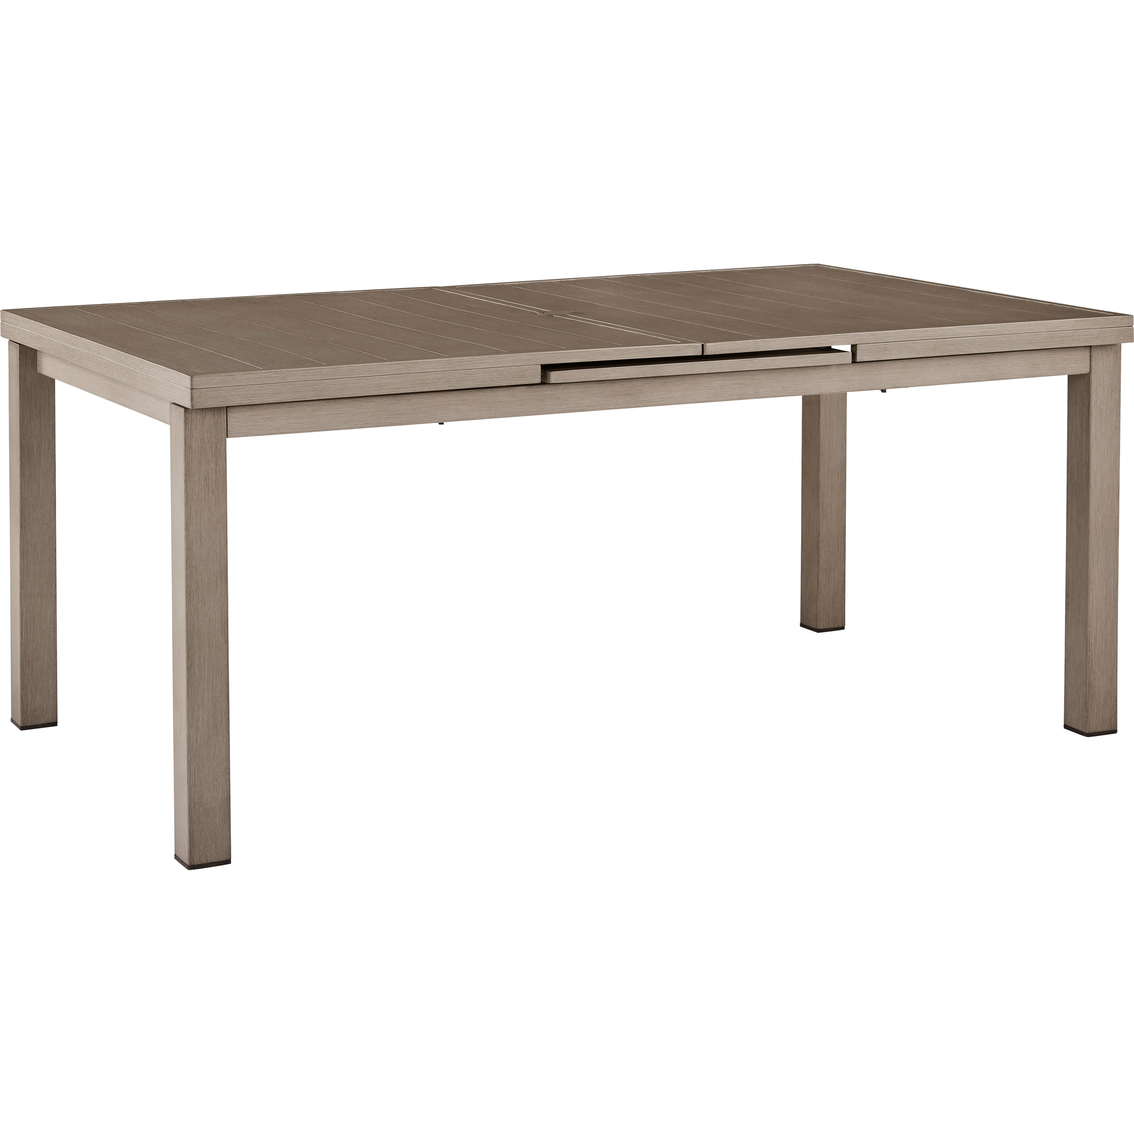 Signature Design by Ashley Beach Front Outdoor Dining Table - Image 2 of 5